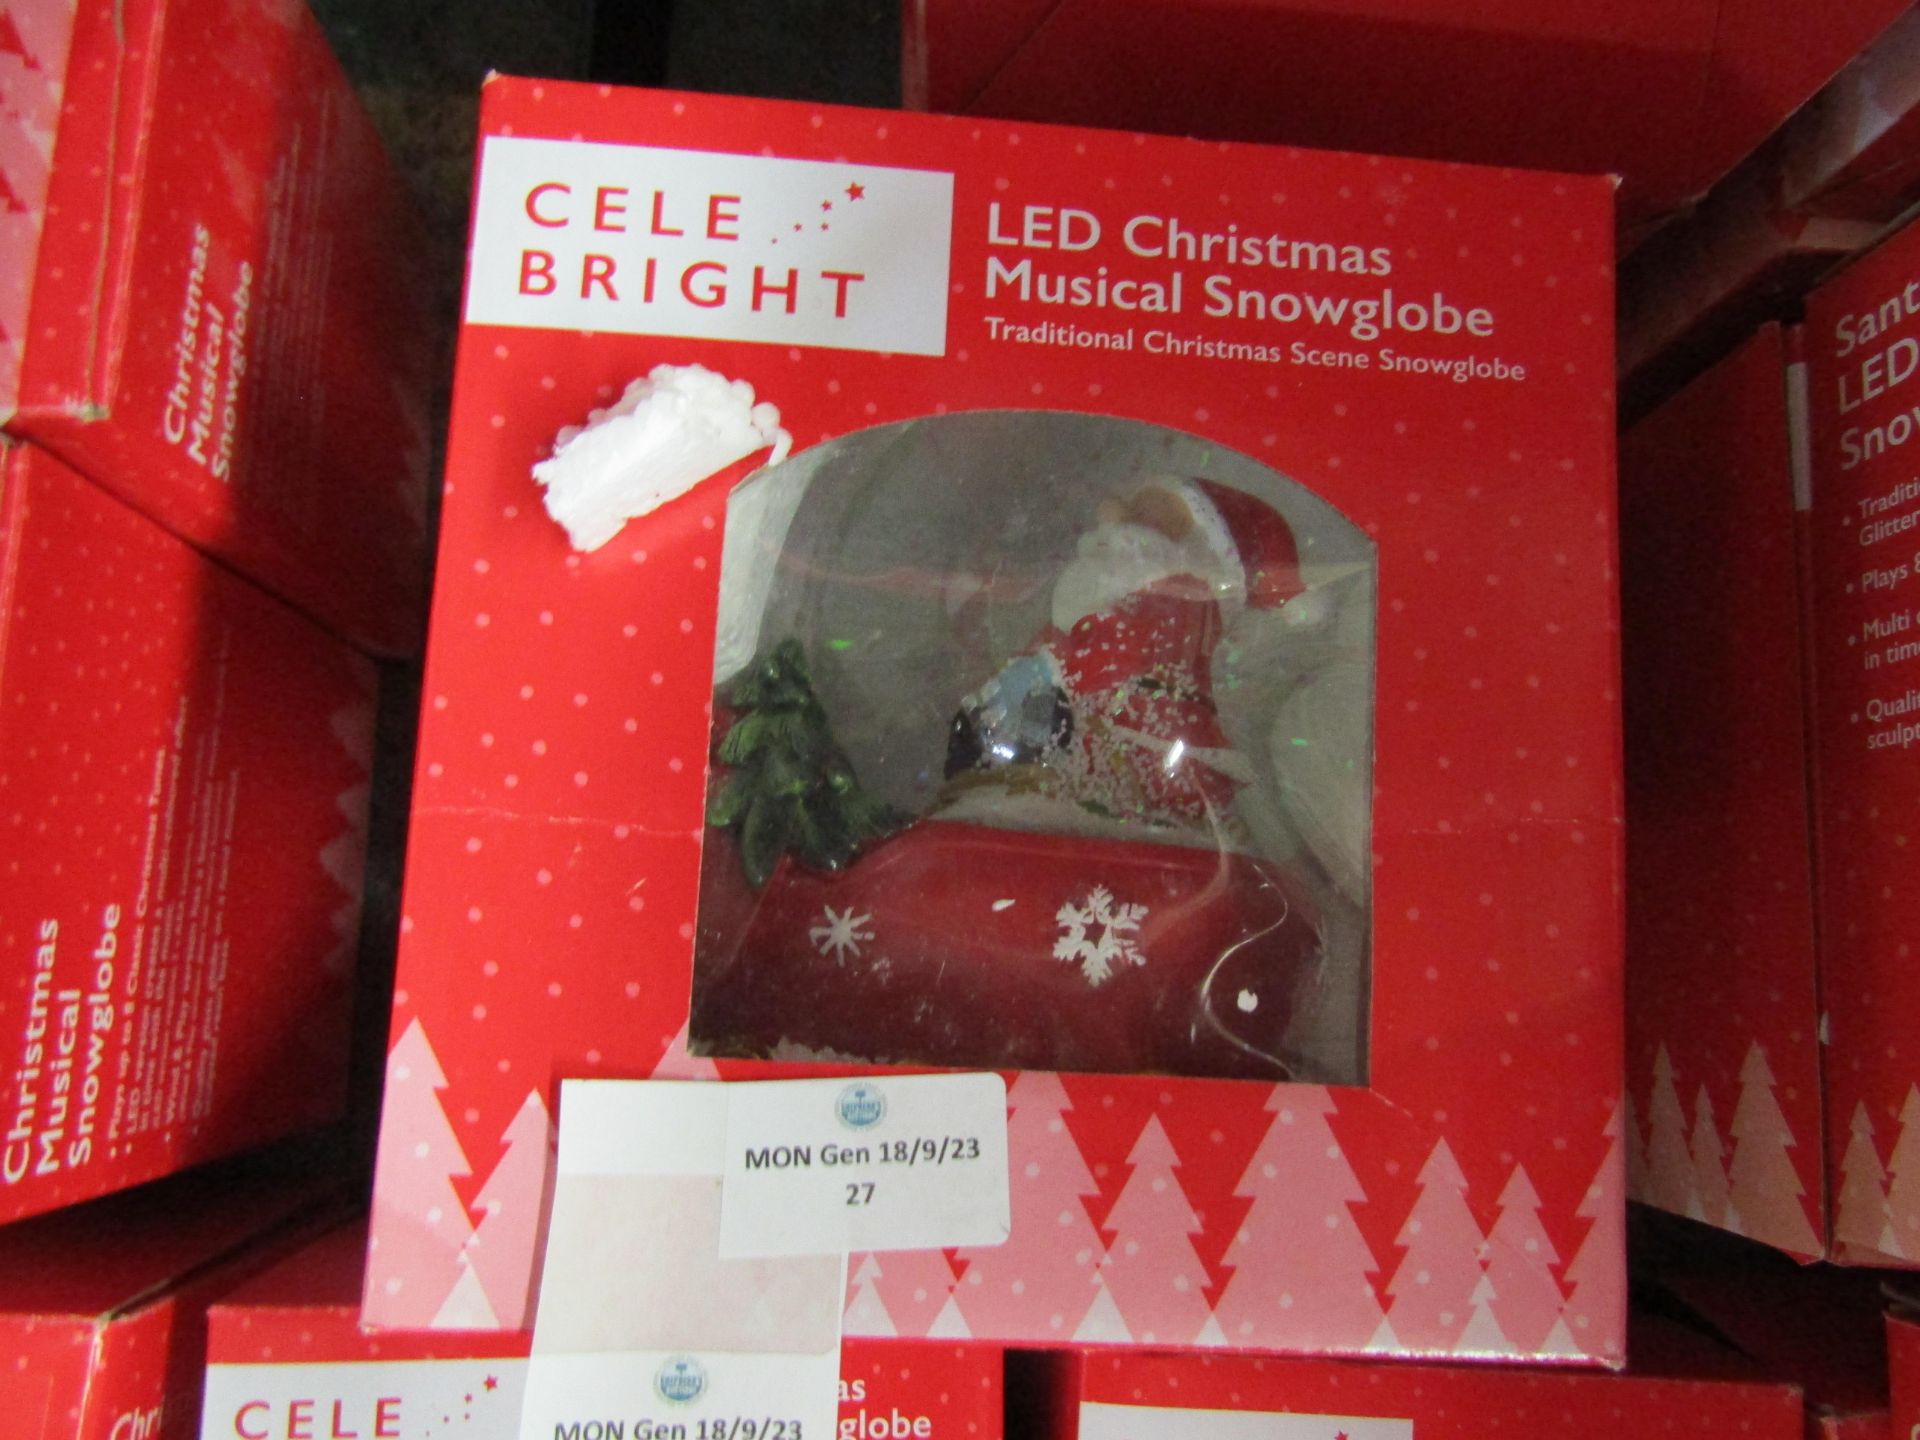 Celebright - LED Musical Christmas Snowglode - Looks In Good Condition & Boxed.